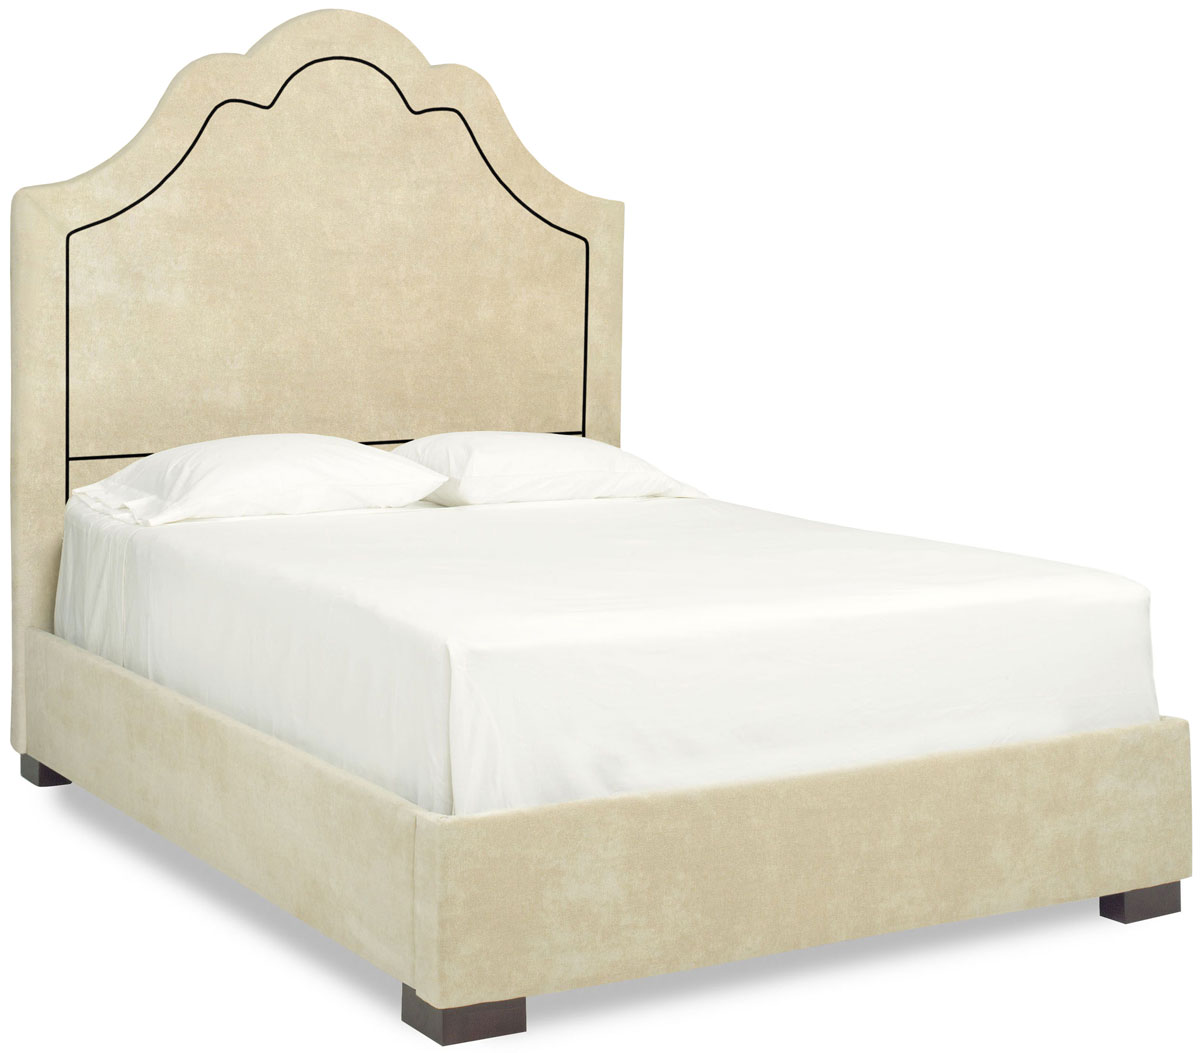 Dream Creations Upholstered Bed with Zurro Headboard